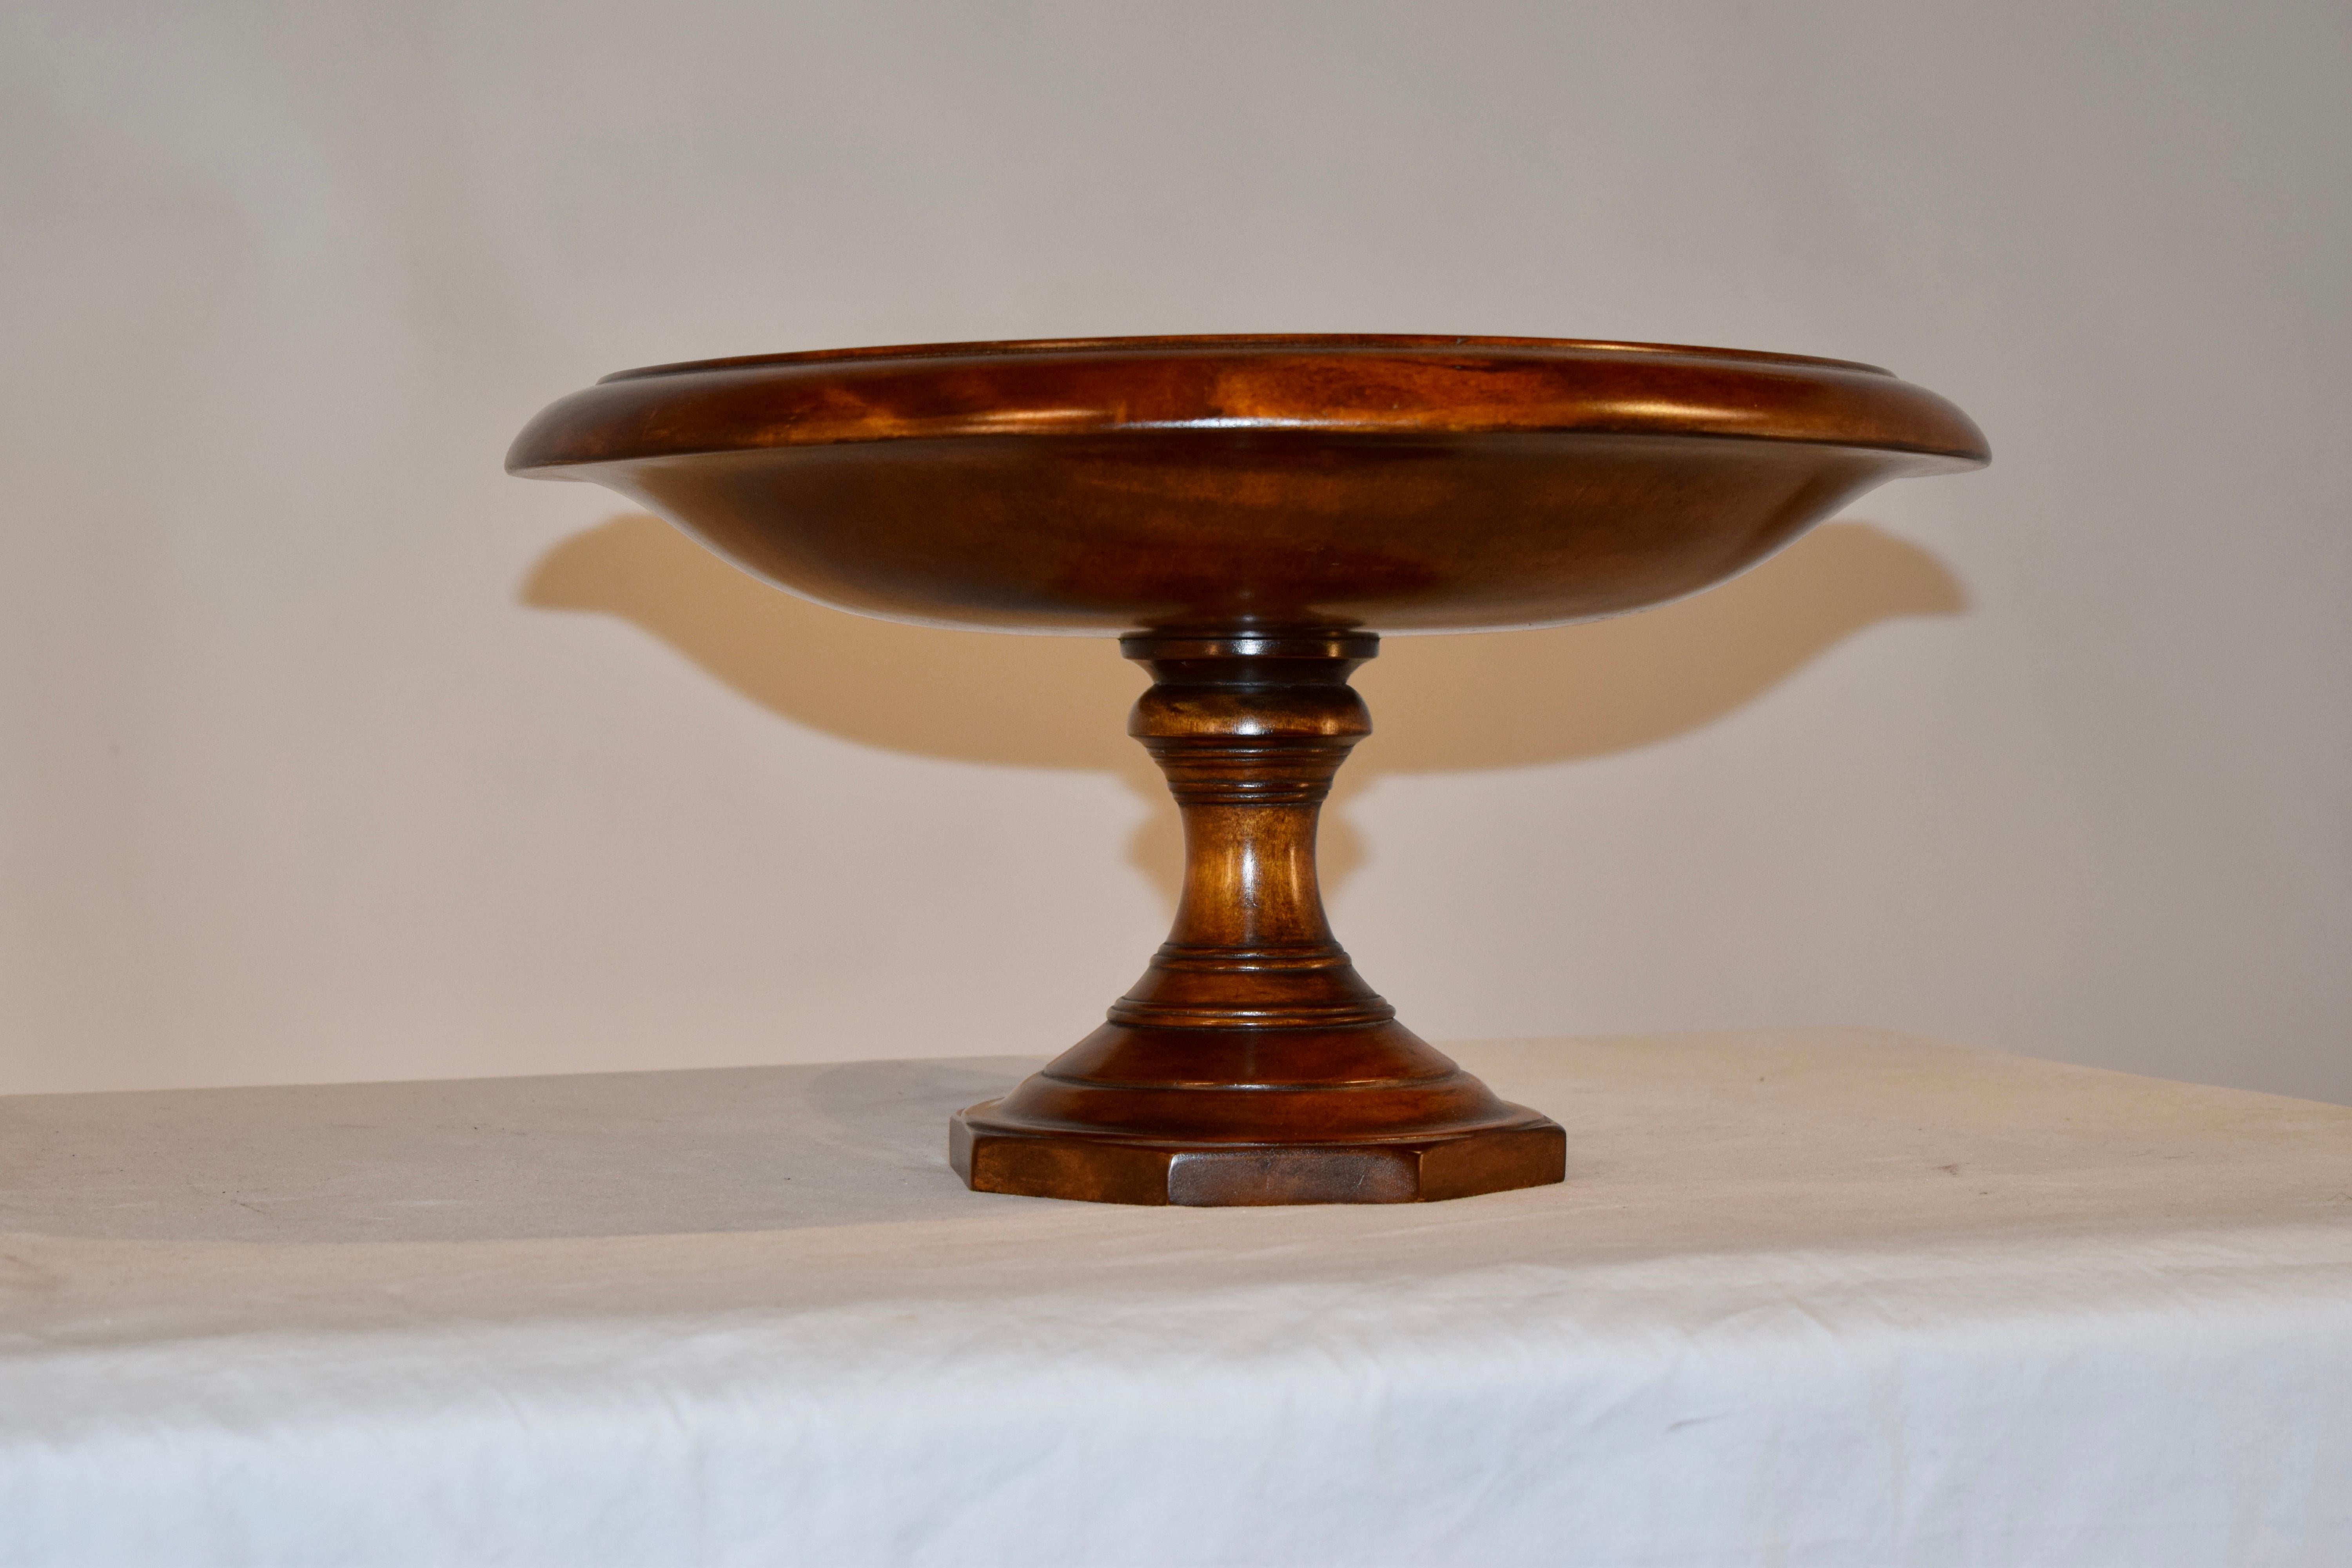 English footed large bowl made from mahogany, circa 1900. The bowl is nicely hand turned and is supported on a turned pedestal with an octagonal shaped base.